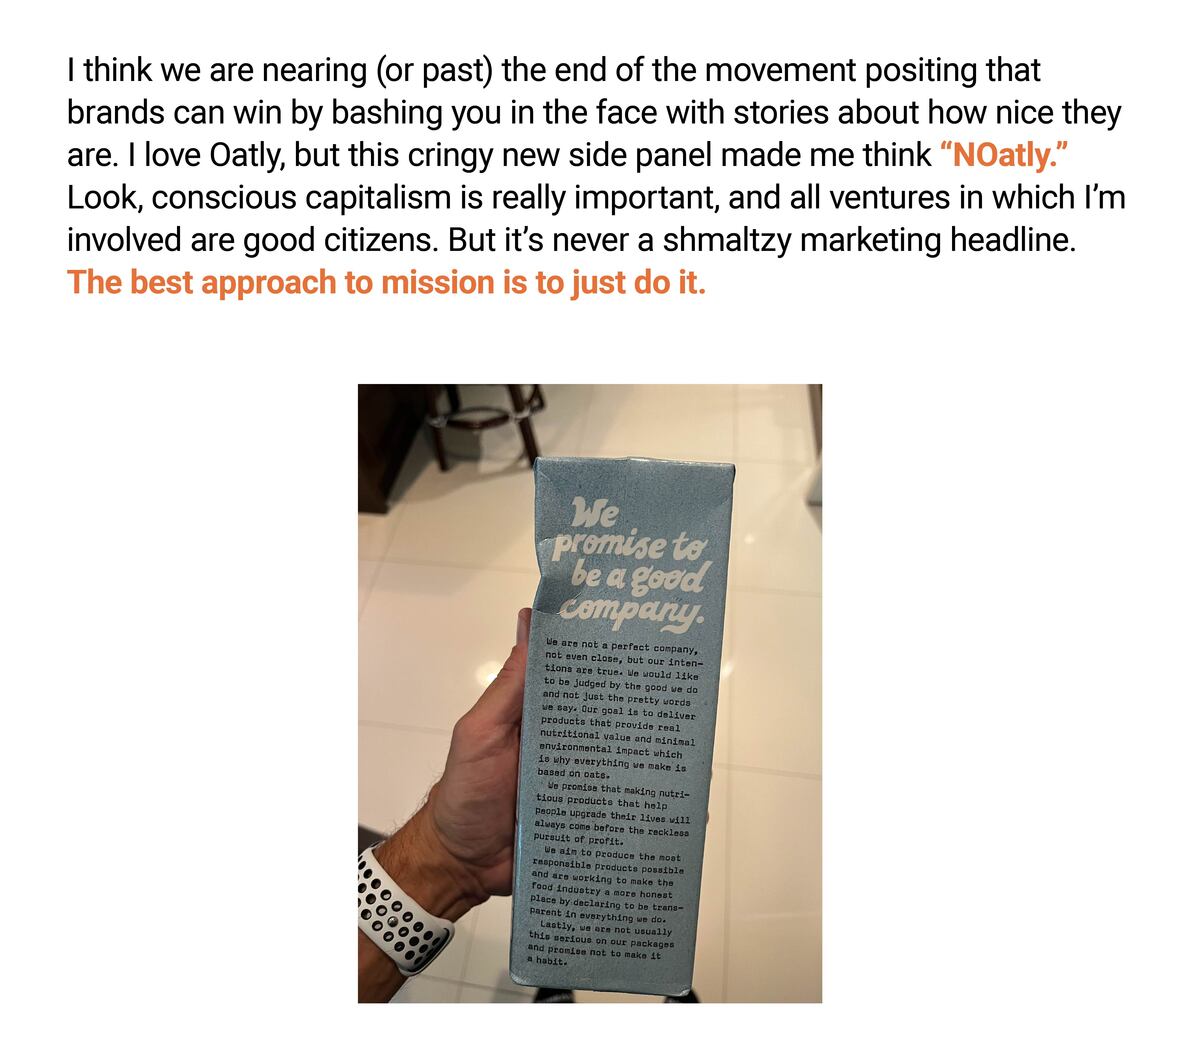 The image features text above and a photo below. The text above reads: "I think we are nearing (or past) the end of the movement positing that brands can win by bashing you in the face with stories about how nice they are. I love Oatly, but this cringy new side panel made me think "NOatly." Look, conscious capitalism is really important, and all ventures in which I’m involved are good citizens. But it’s never a shmaltzy marketing headline. The best approach to mission is to just do it."

The photo shows a hand holding a carton of Oatly milk with a side panel stating: "We promise to be a good company." Below this headline, there's further text on the carton that begins with "We are not a perfect company, not even close, but our intentions are true..." The rest of the text on the carton is small and not fully legible in the image.

The overall message of the image and text is a critique of marketing strategies that overly emphasize a company's ethical stance or mission, suggesting that authentic action is more important than promotional claims.